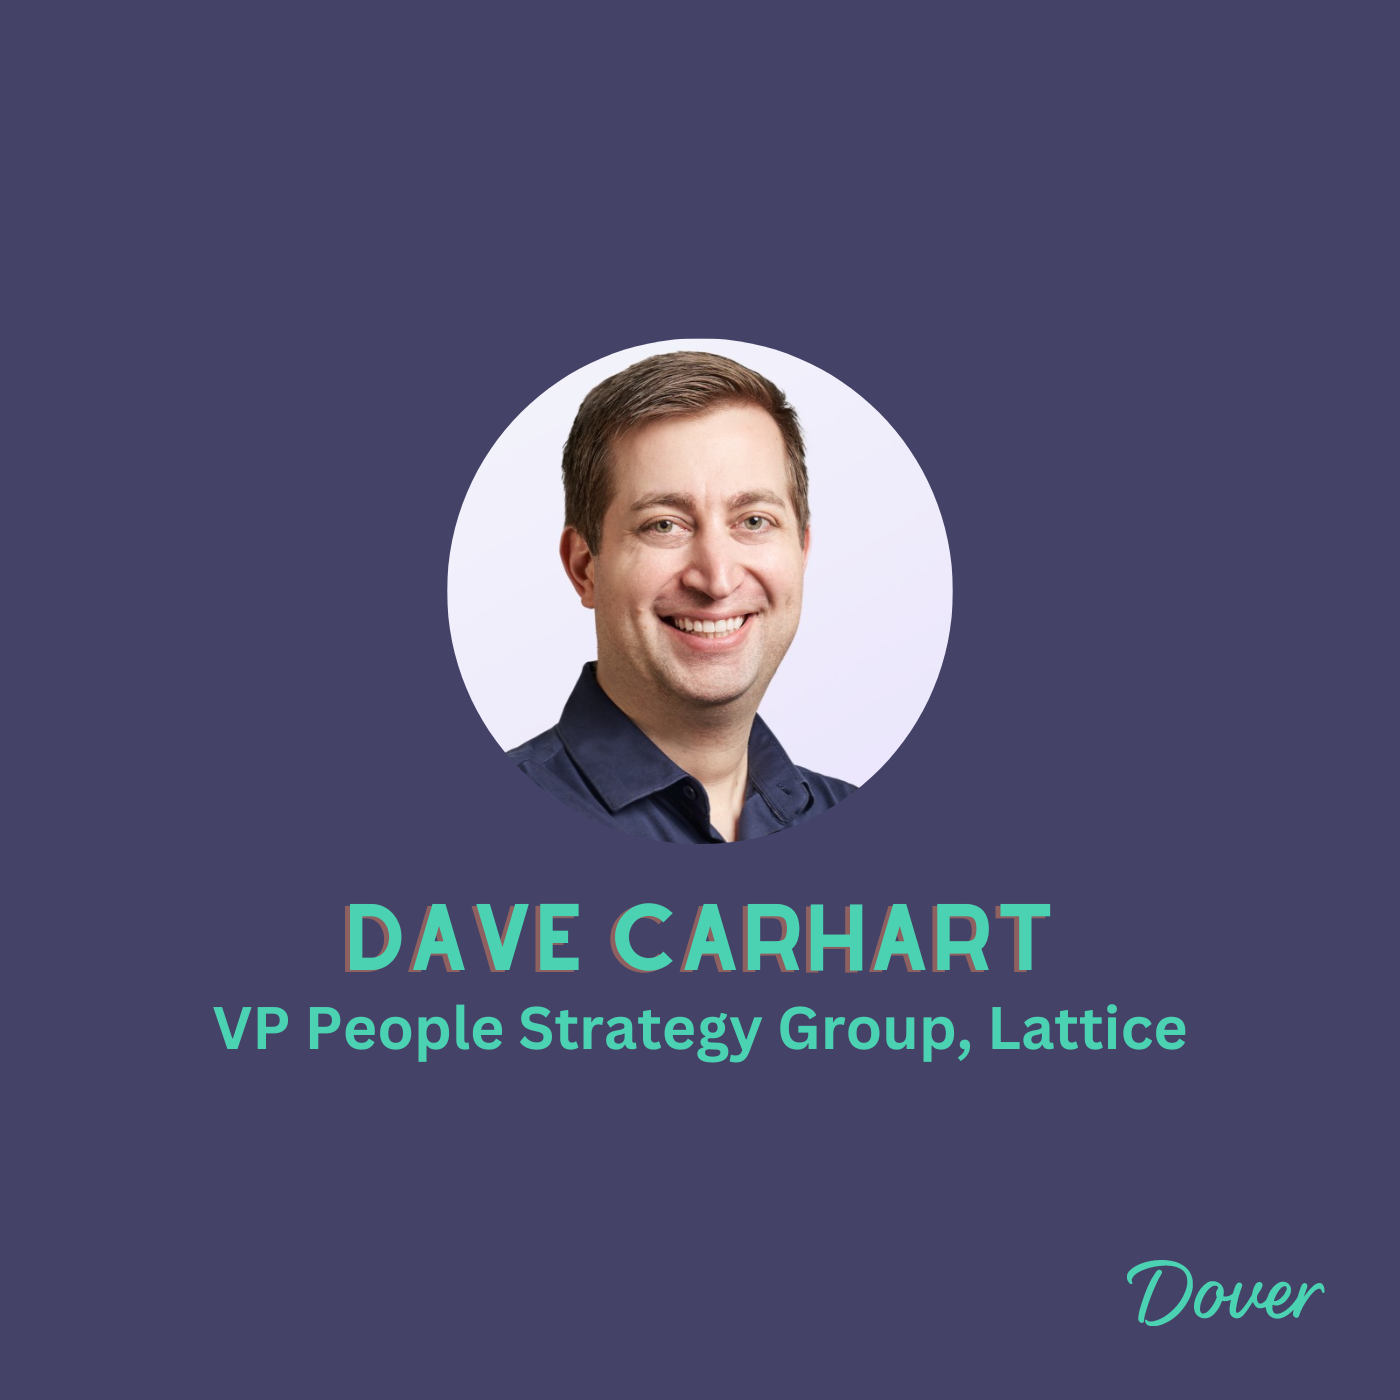 EPISODE #15: People Strategy Through The Stages: Dave Carhart of Lattice Shares How to Build a Proactive People Strategy From Early Co Through IPO